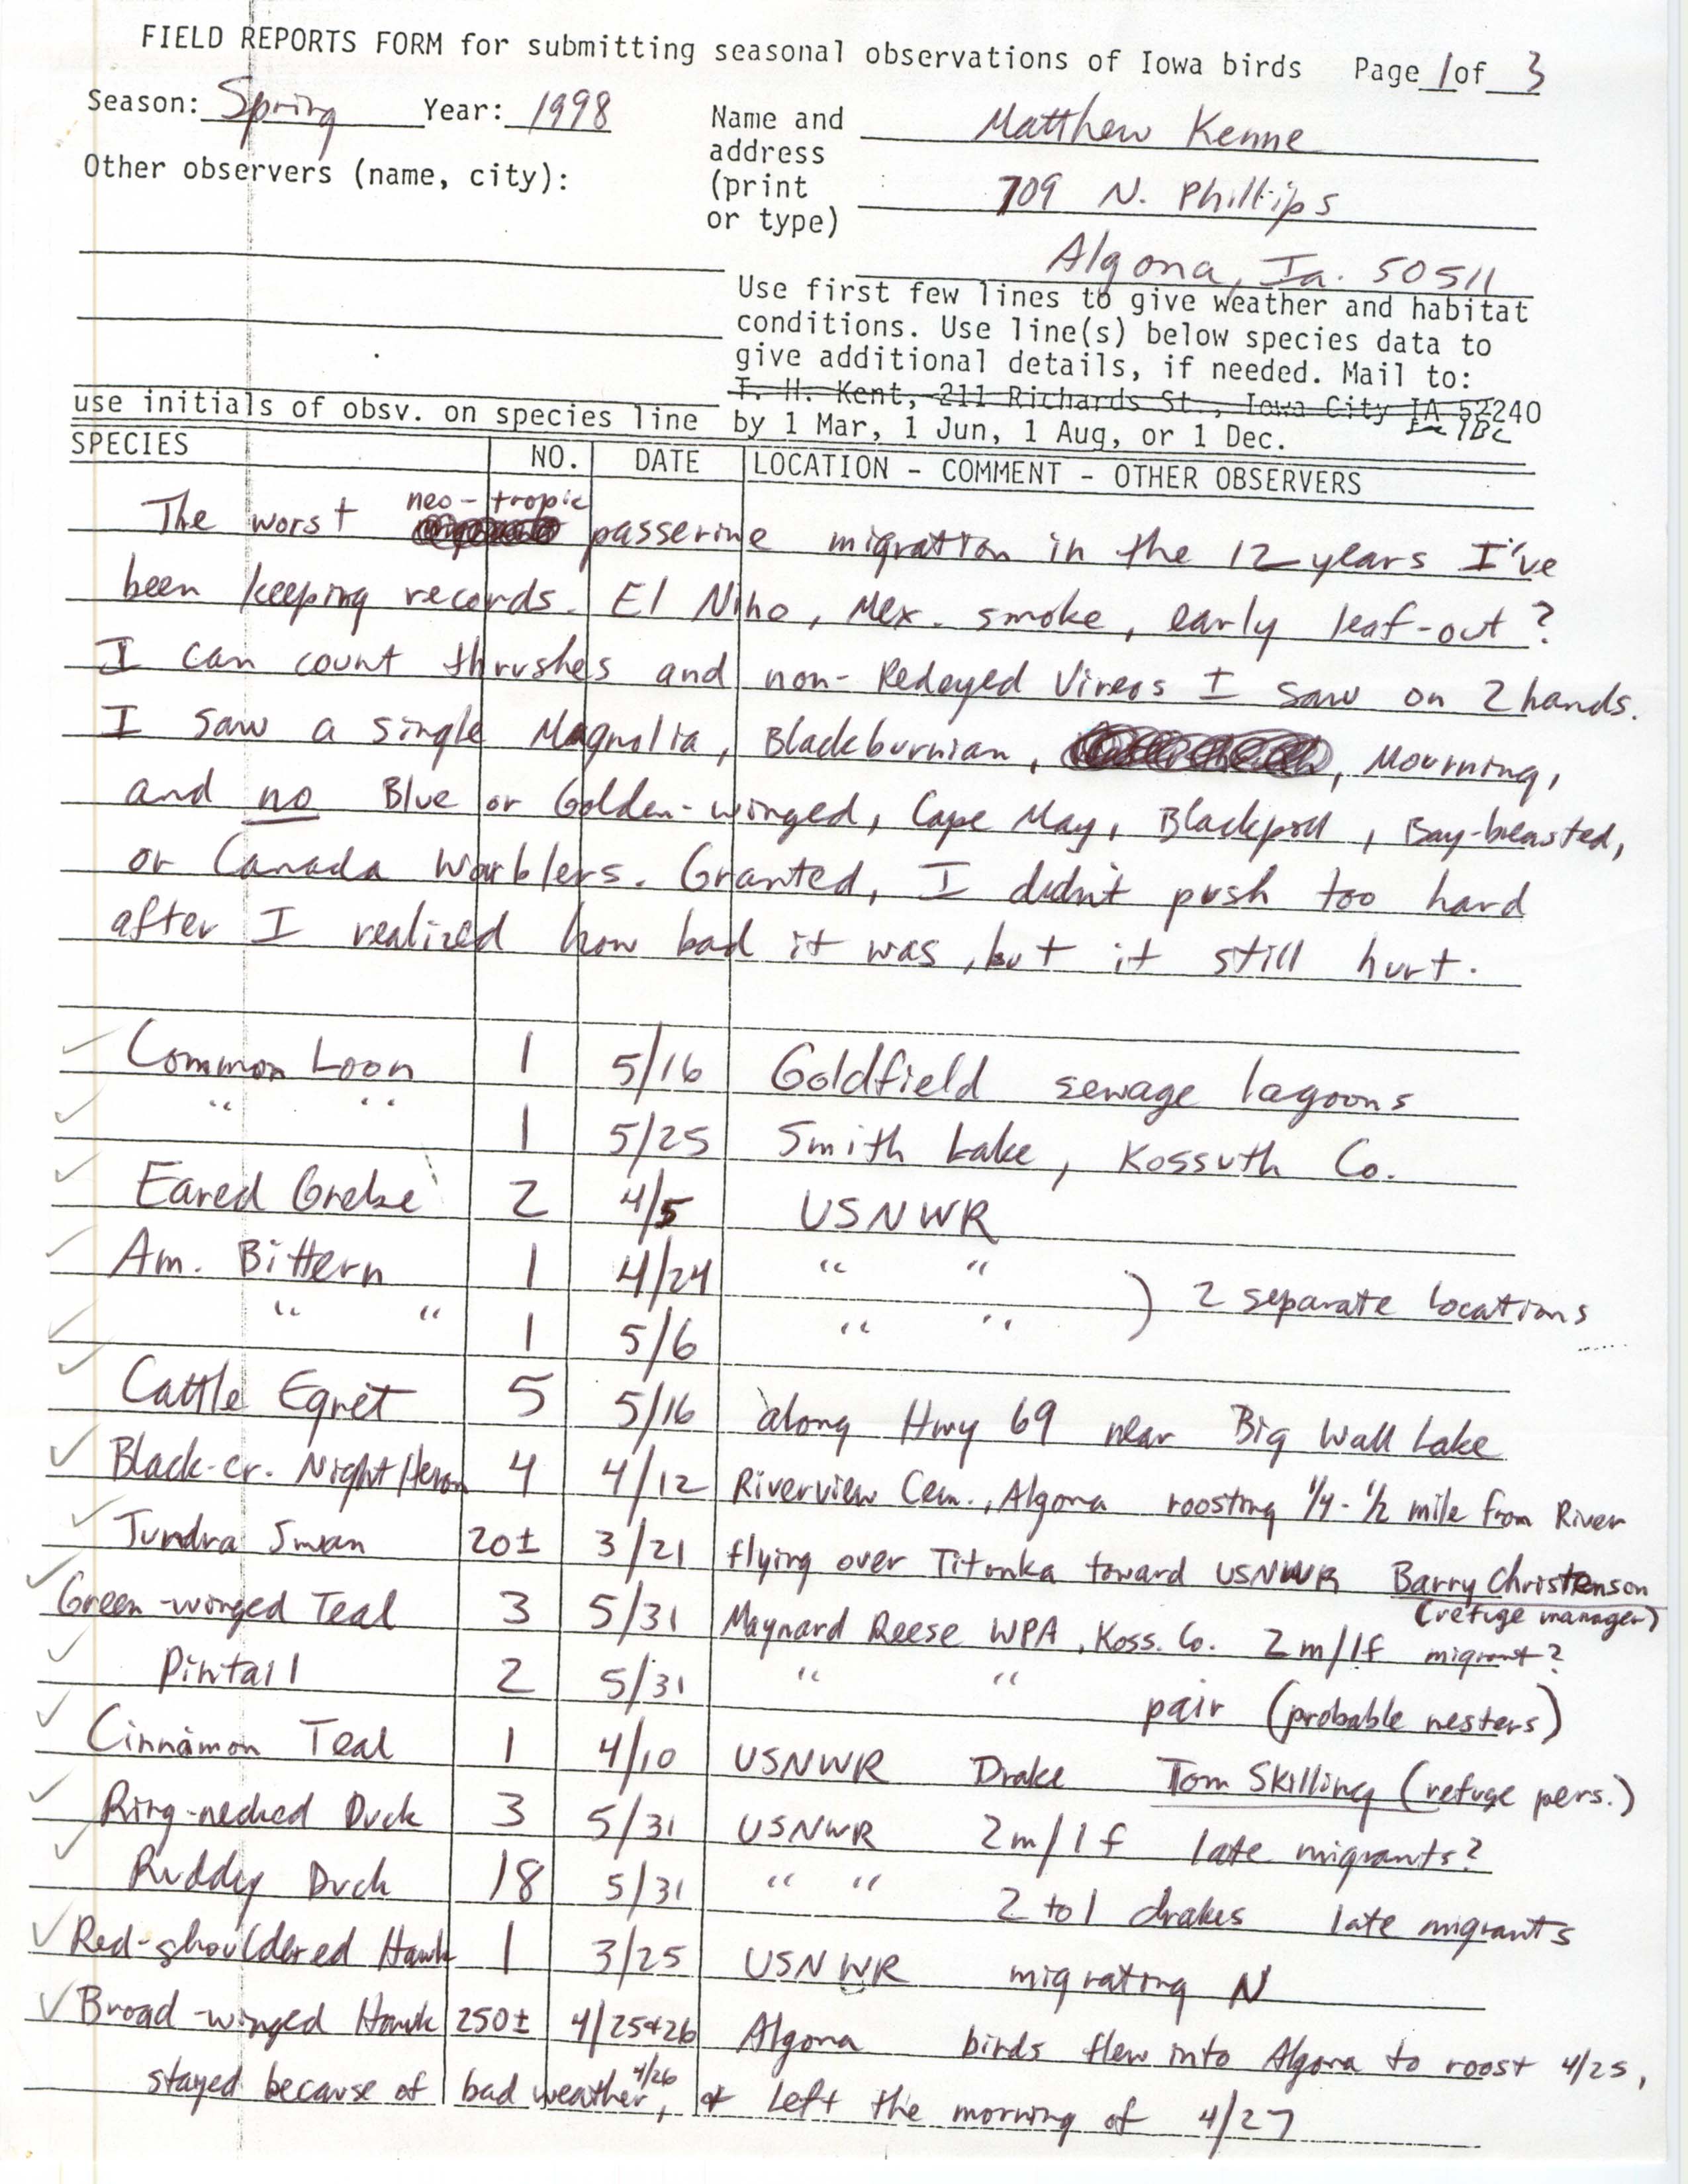 Field reports form for submitting seasonal observations of Iowa birds, Matthew Kenne, spring 1998